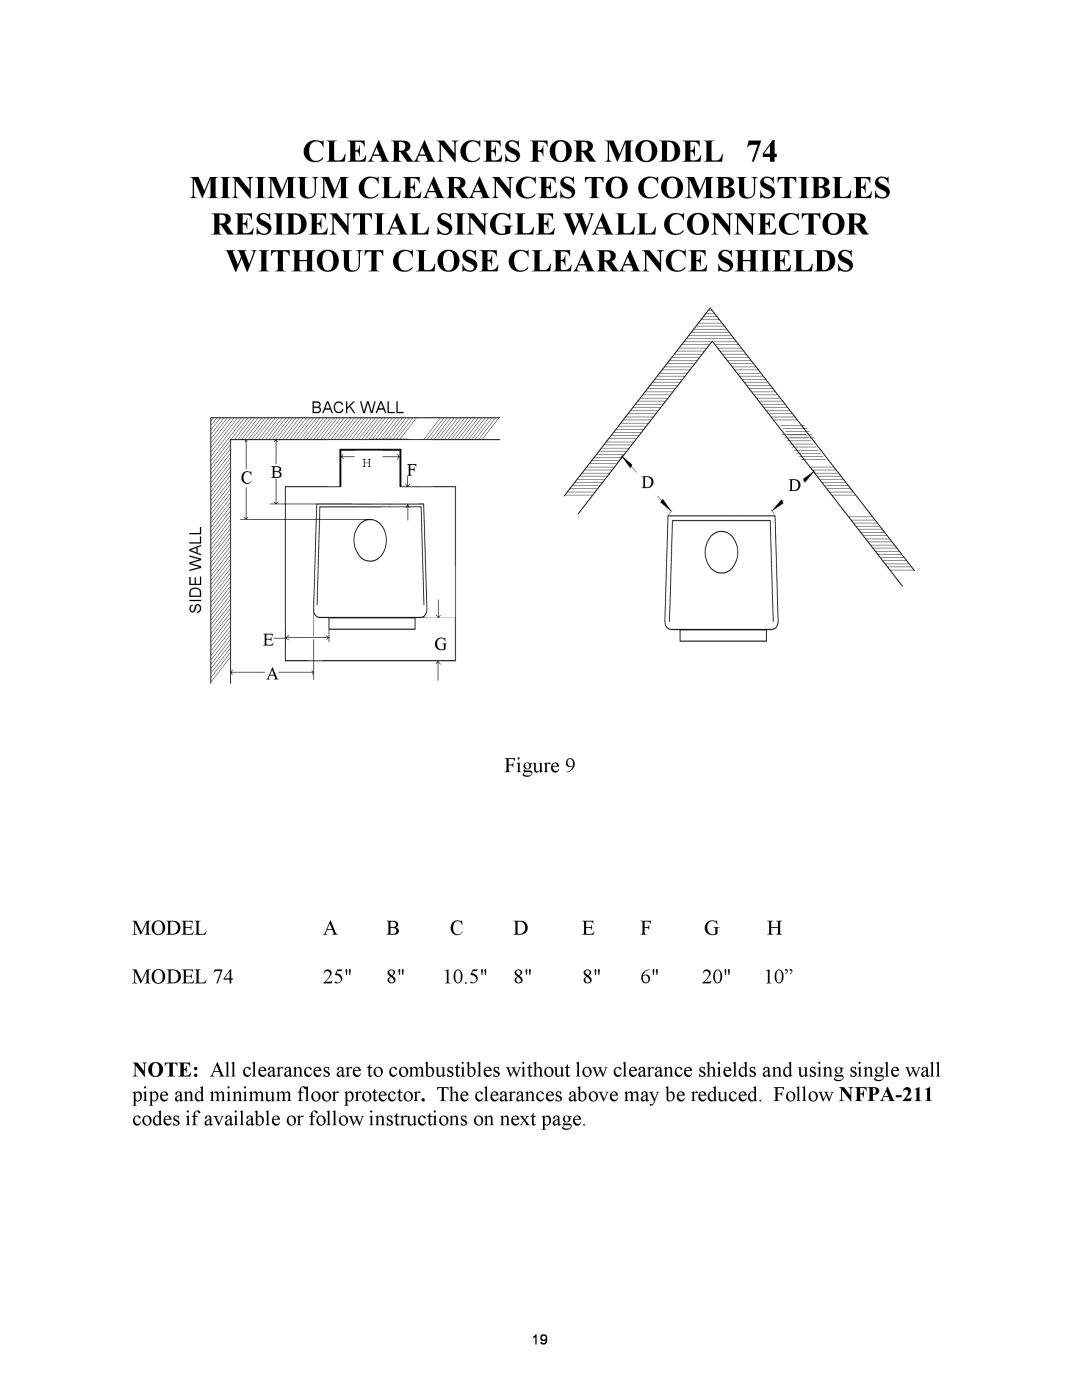 New Buck Corporation 74 installation instructions Clearances For Model 